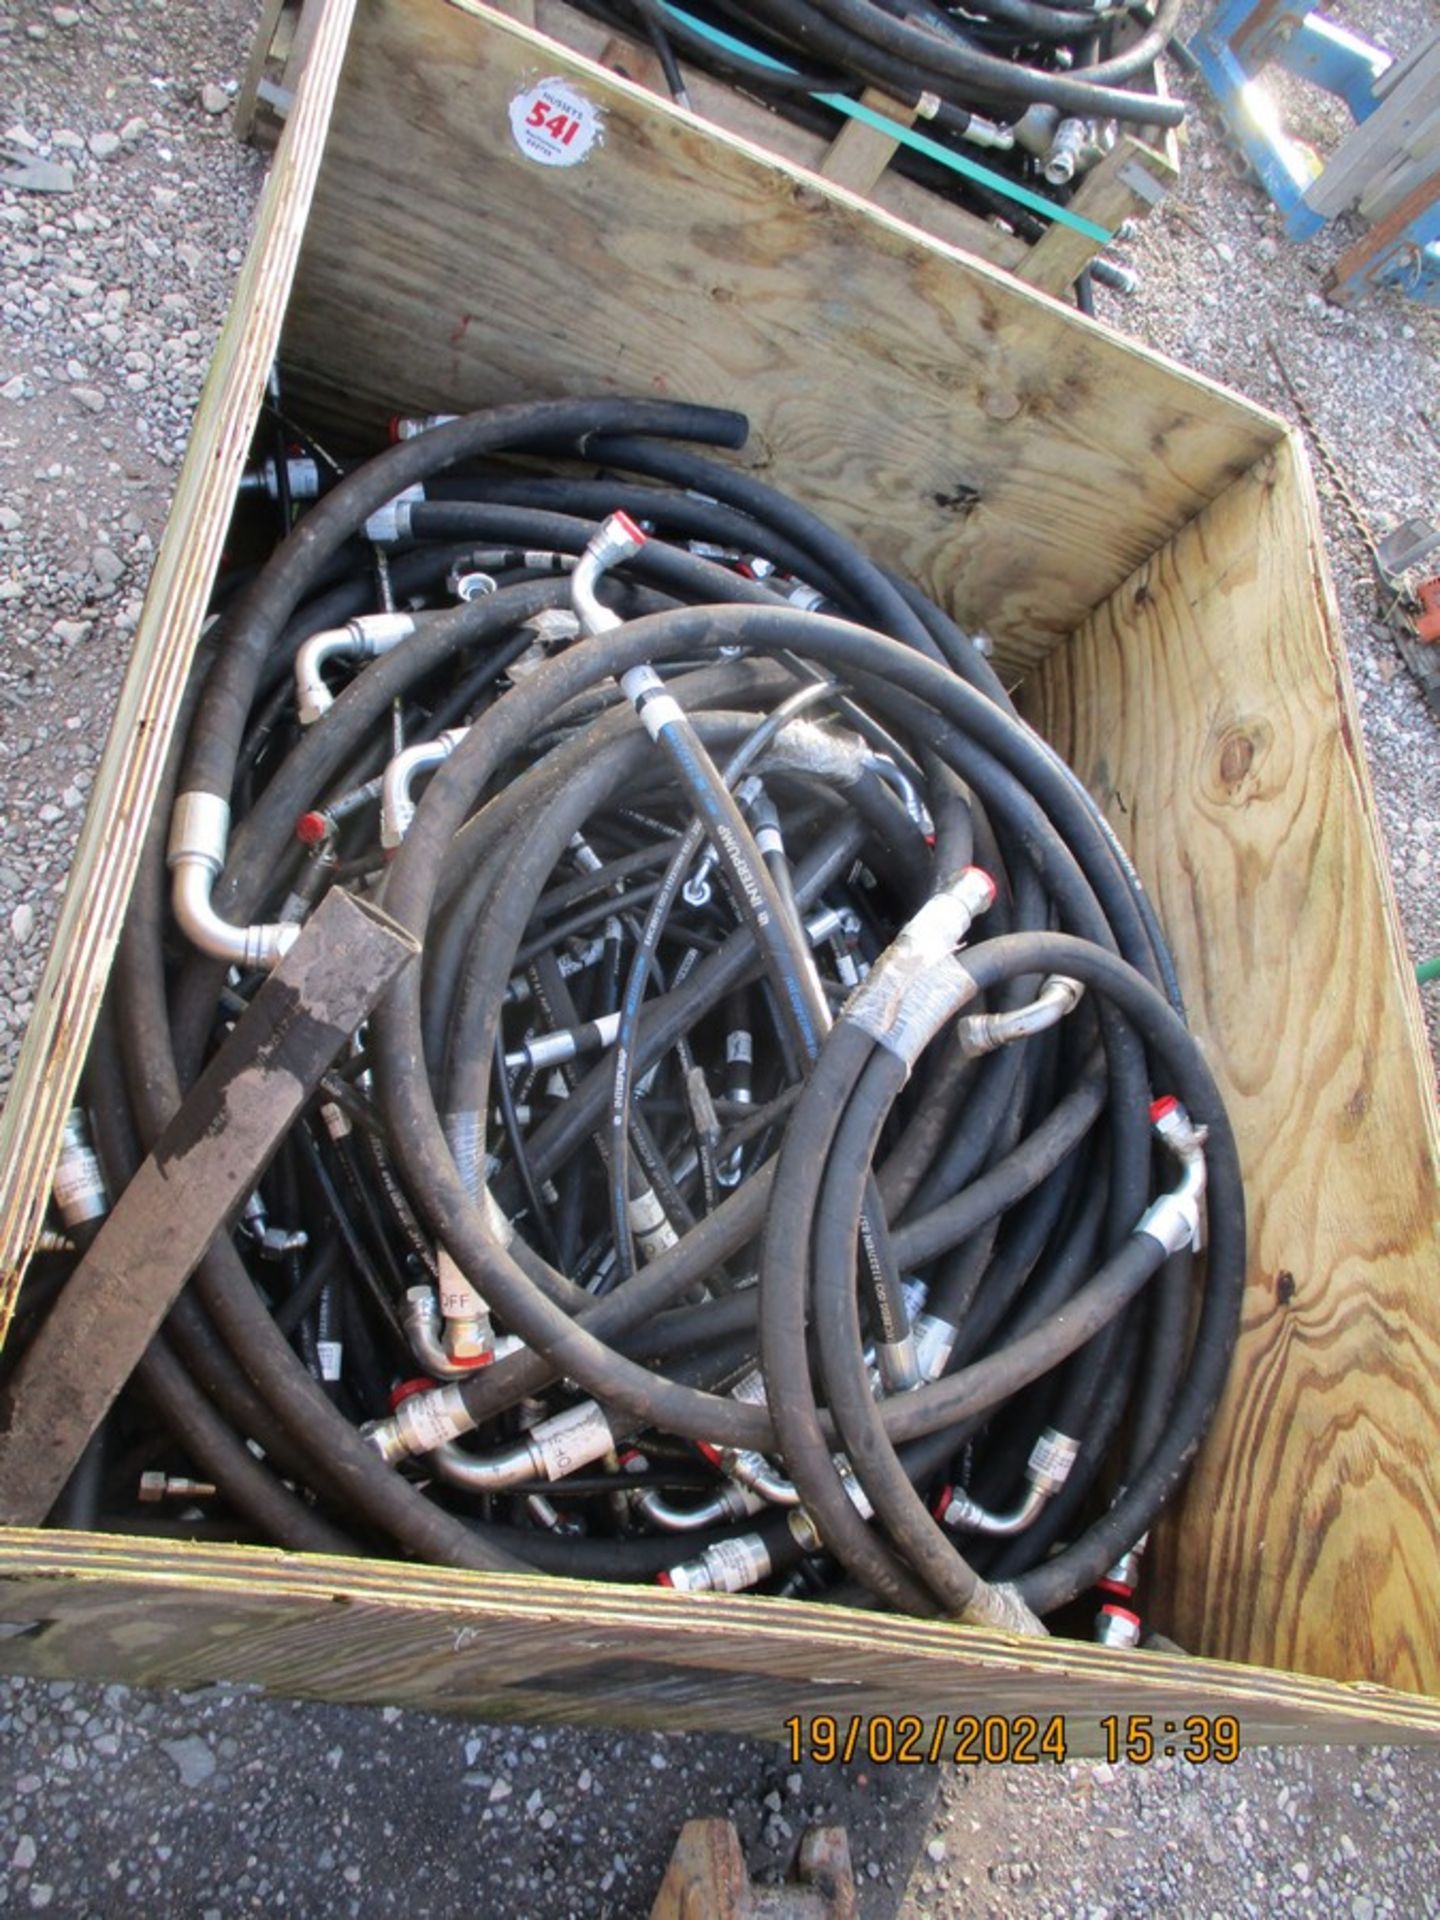 CRATE OF HYDRAULIC HOSES